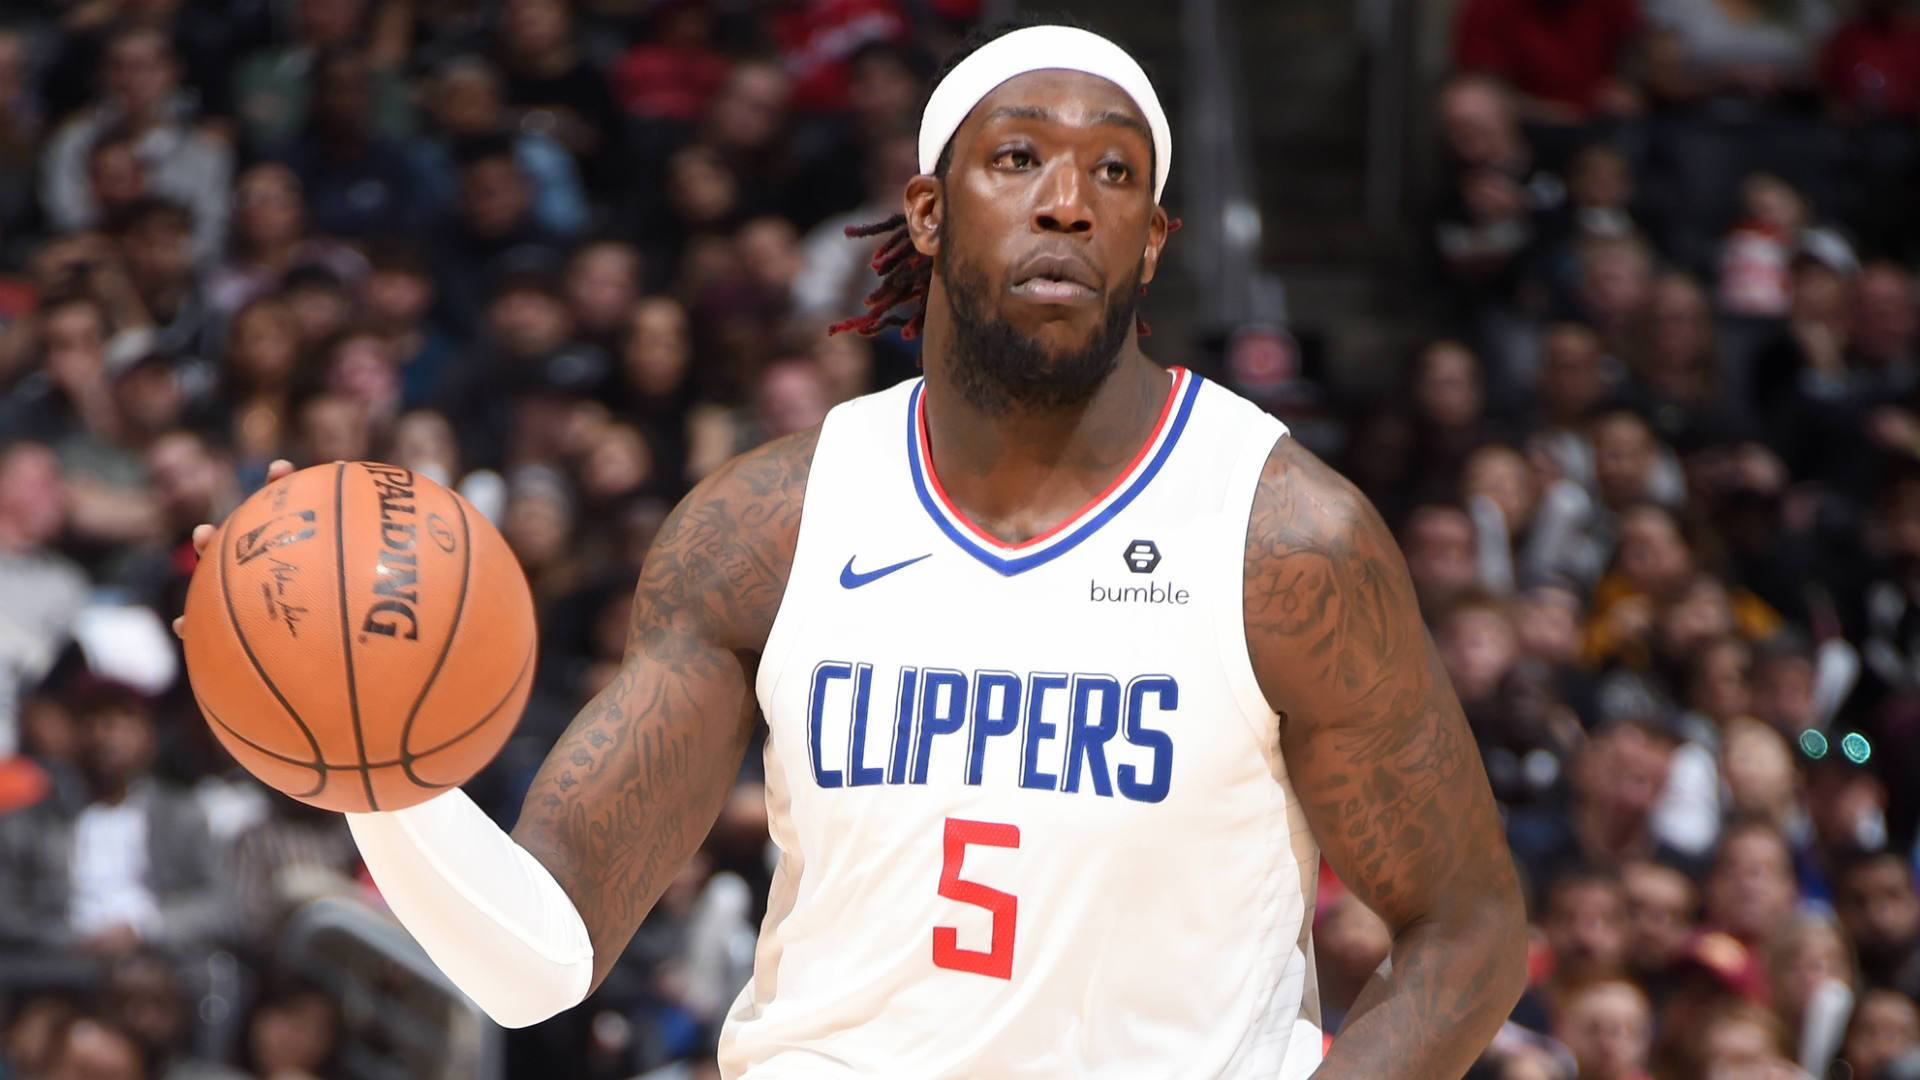 Report: Montrezl Harrell returns to Clippers on two-year deal | NBA | Sporting News